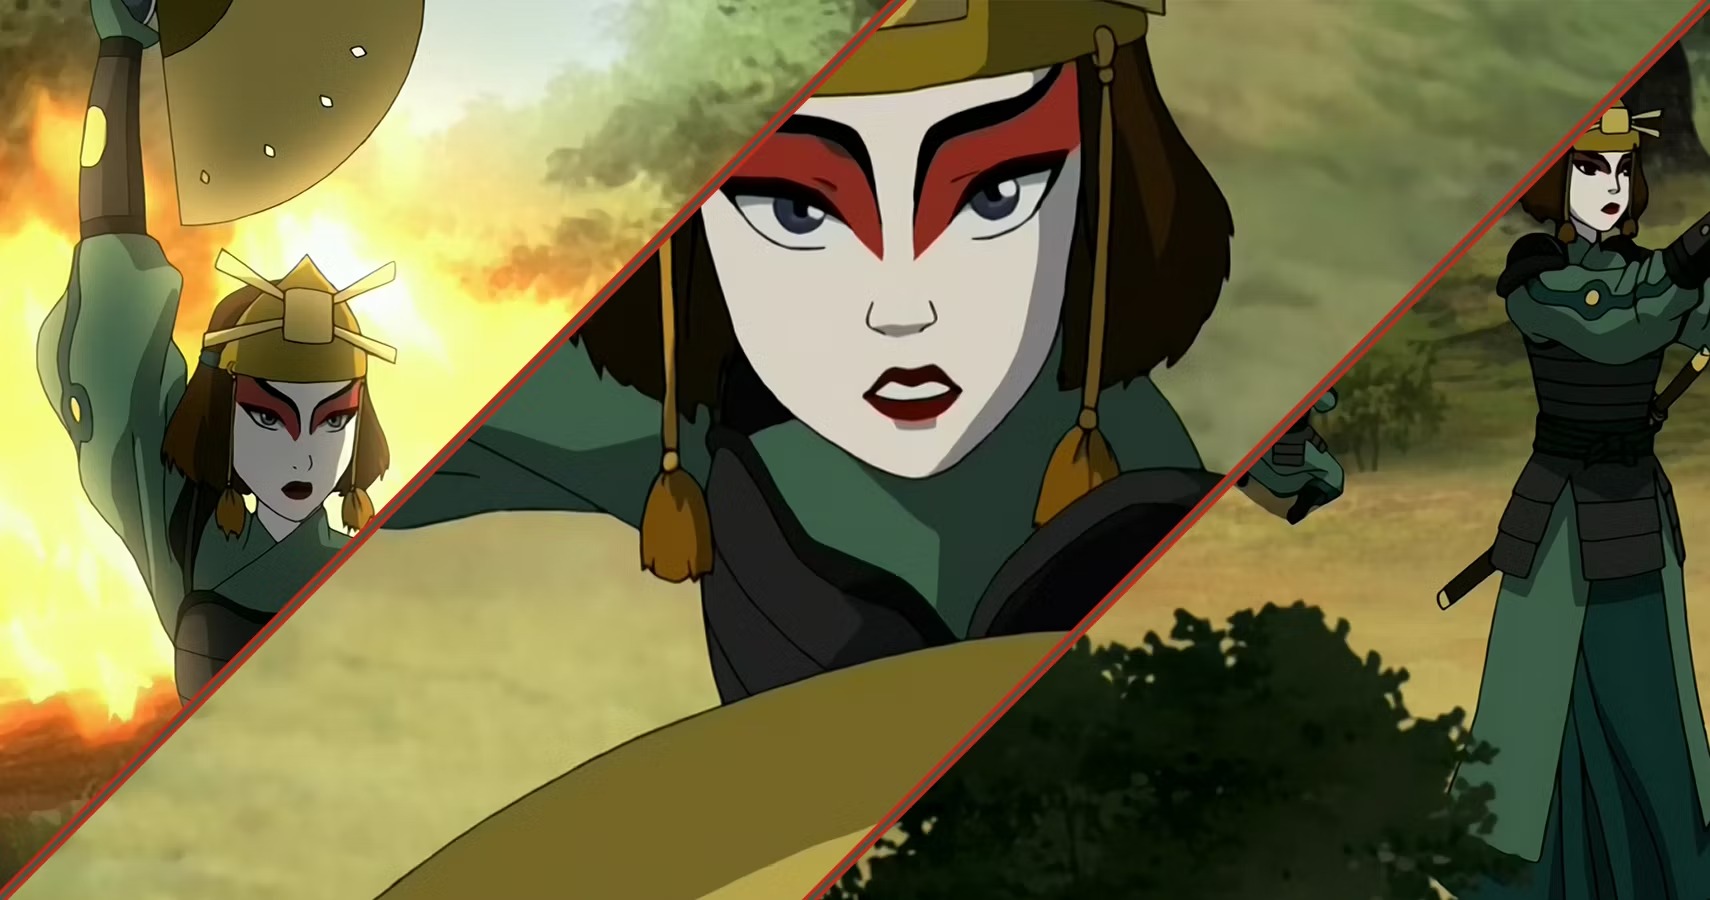 21-facts-about-kyoshi-warriors-avatar-the-last-airbender